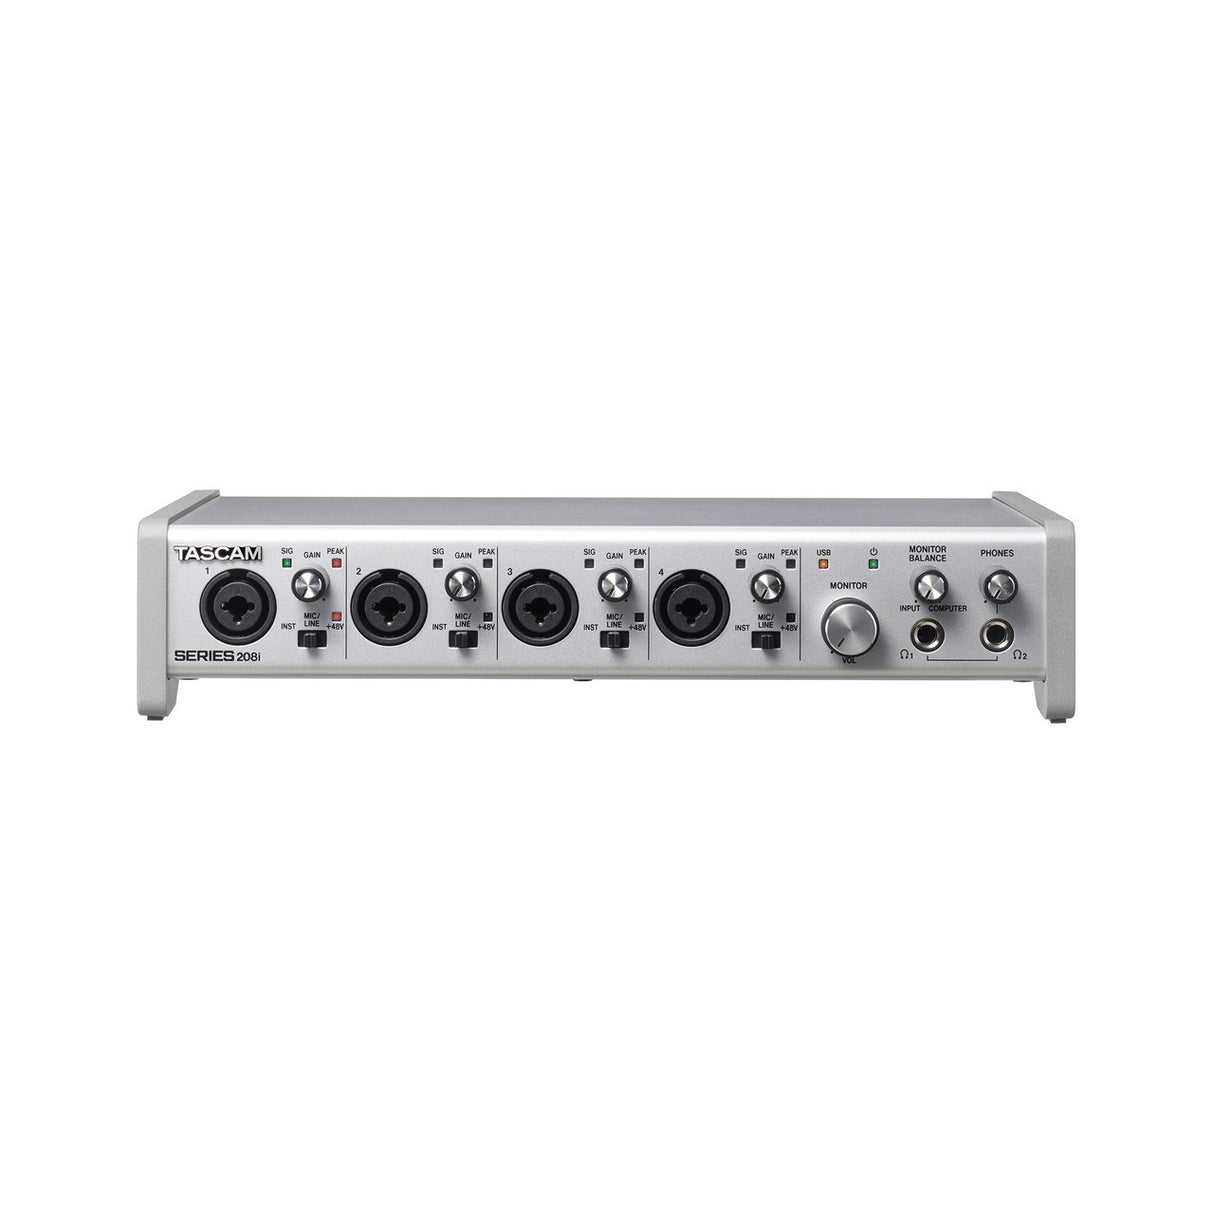 Tascam SERIES 208i 20 In/8 Out USB Audio/MIDI Interface